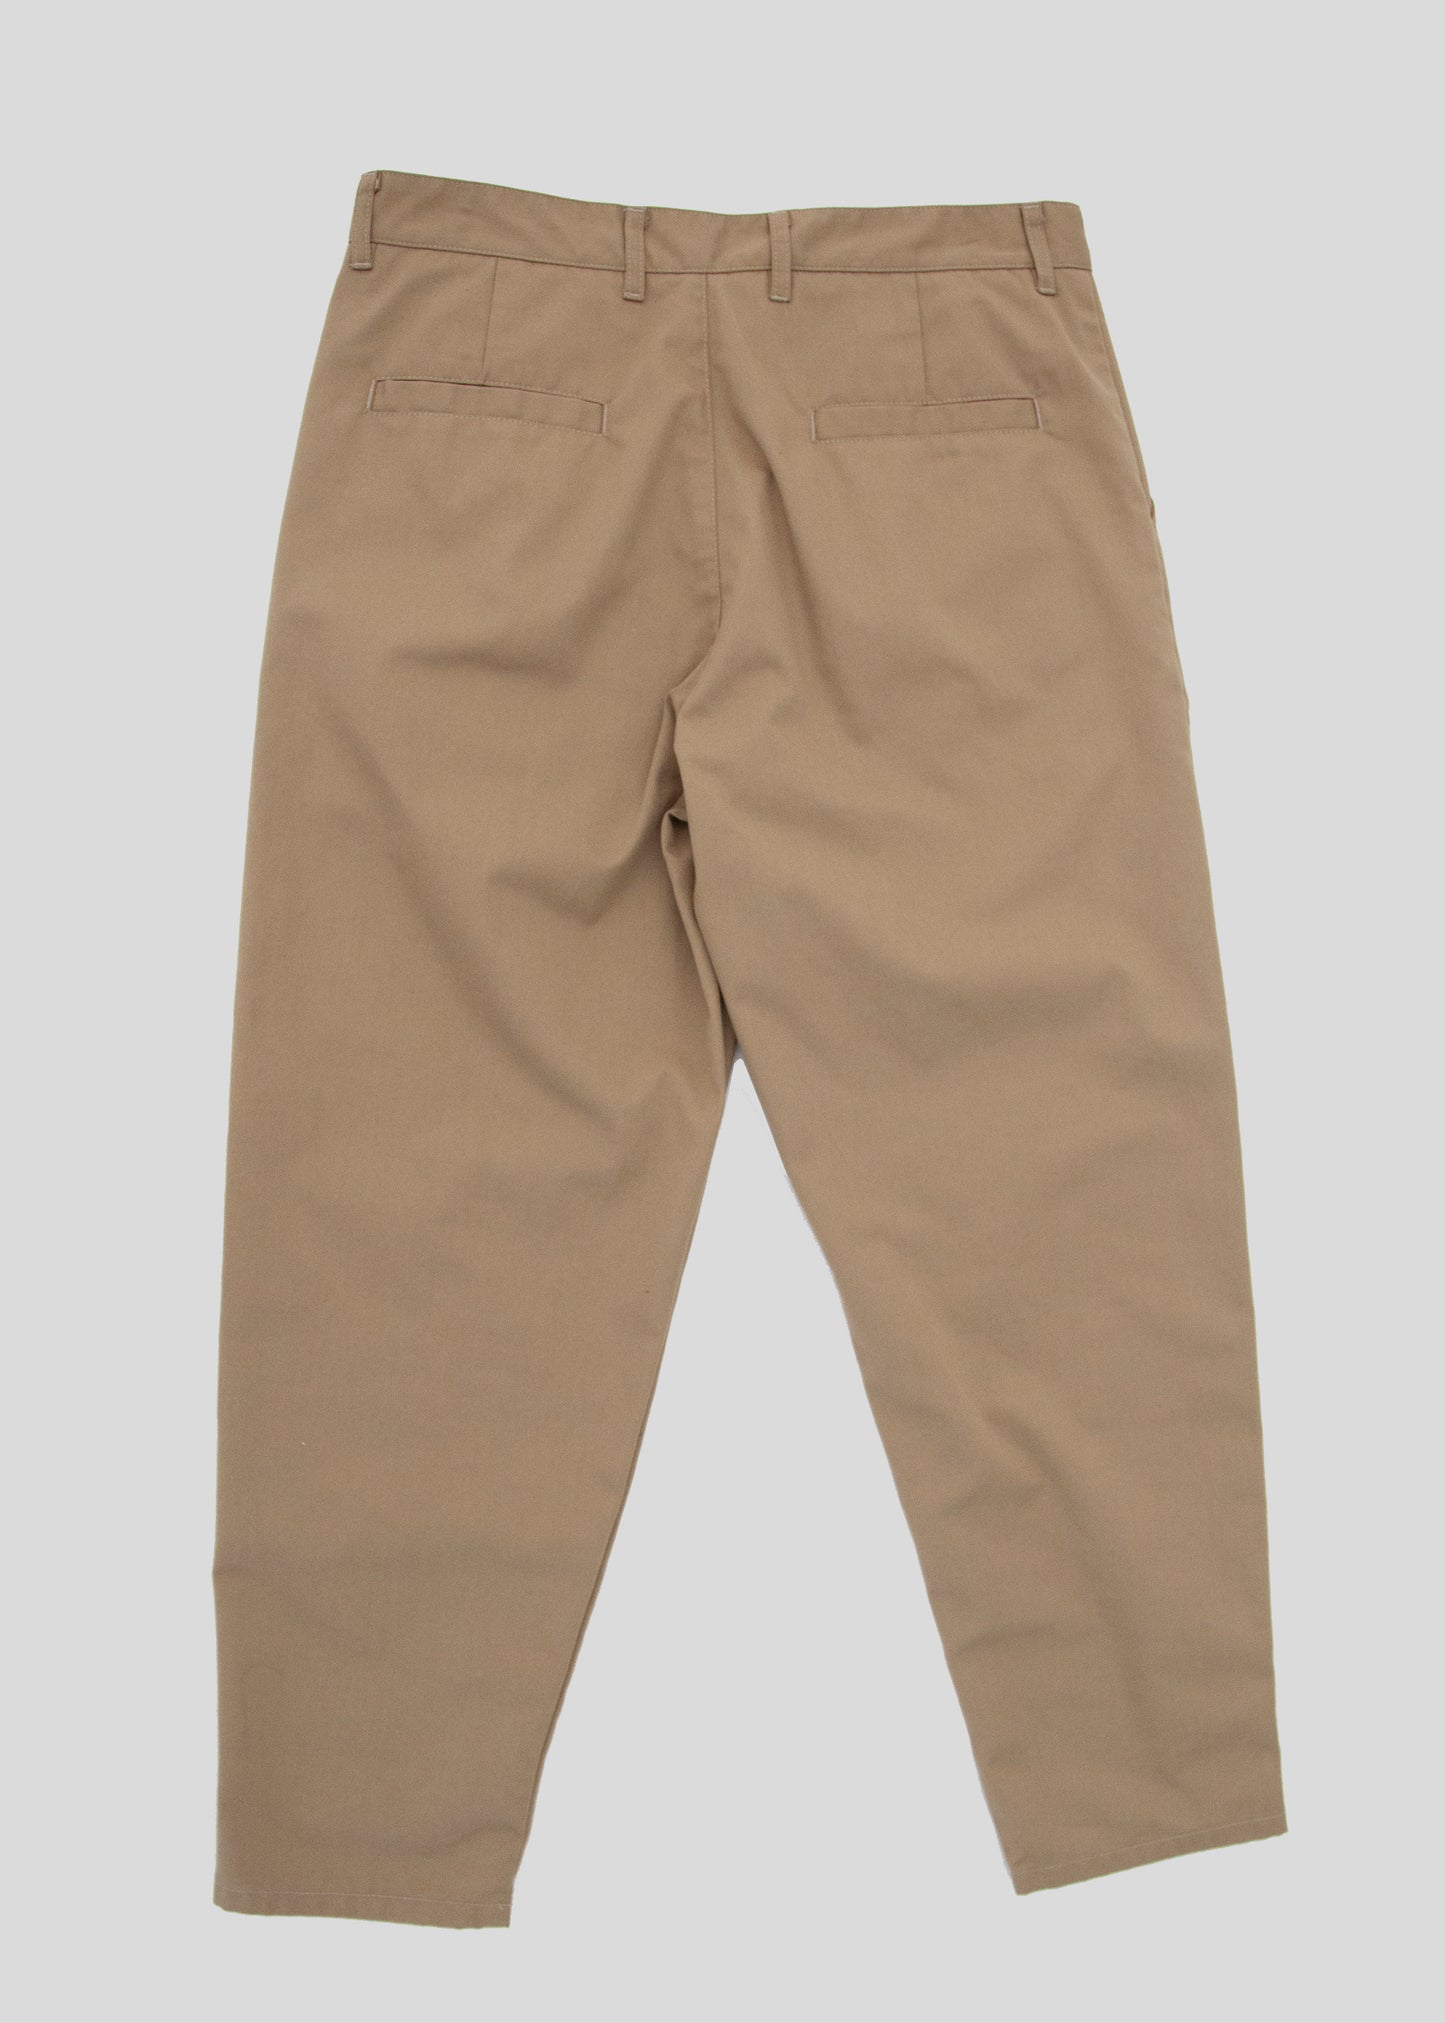 Back flat lay of lightweight danver pants in color khaki